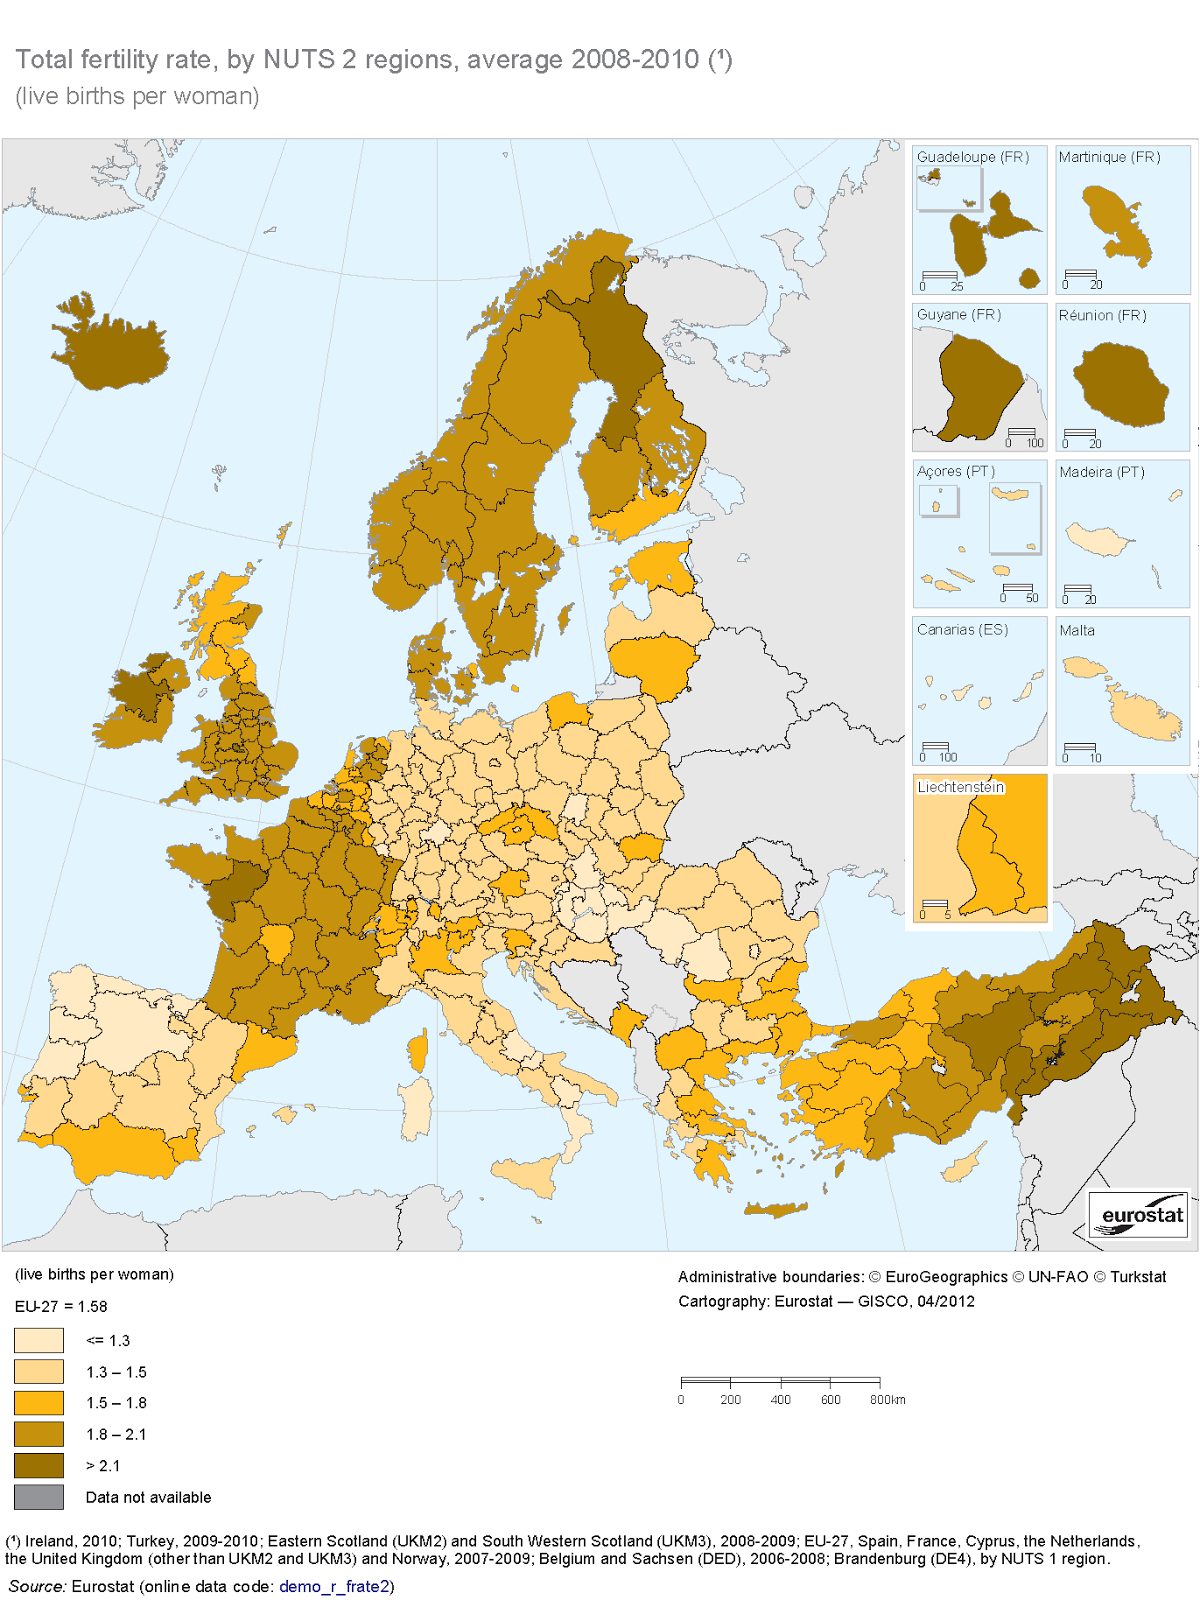 Total Fertility Rate In Europe Vivid Maps